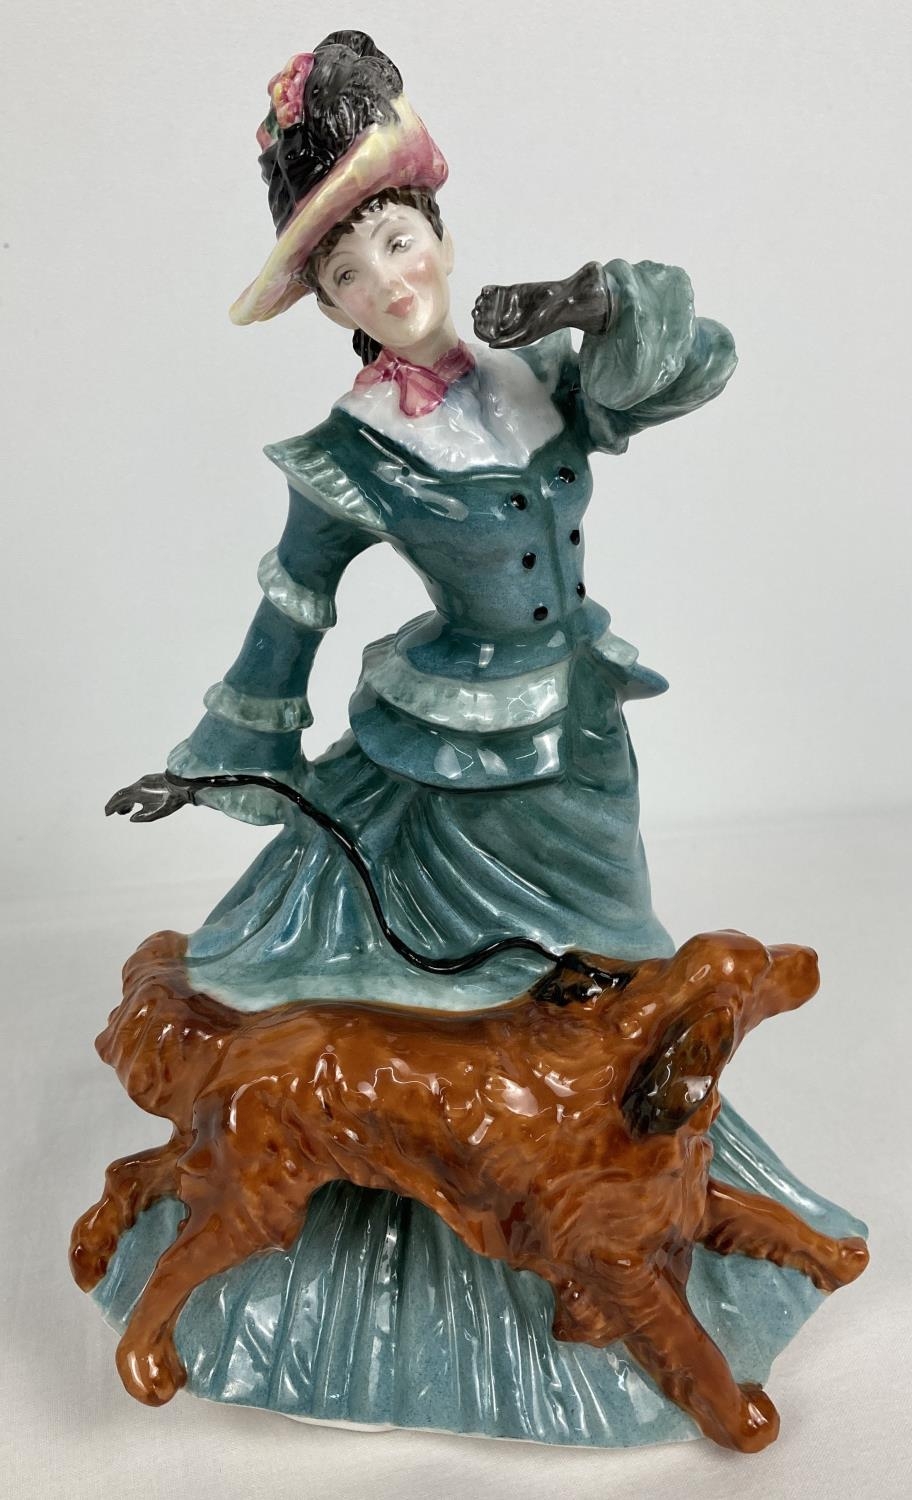 A boxed Royal Doulton figurine - Autumntime, from The Four Seasons collection. HN3621, modelled by